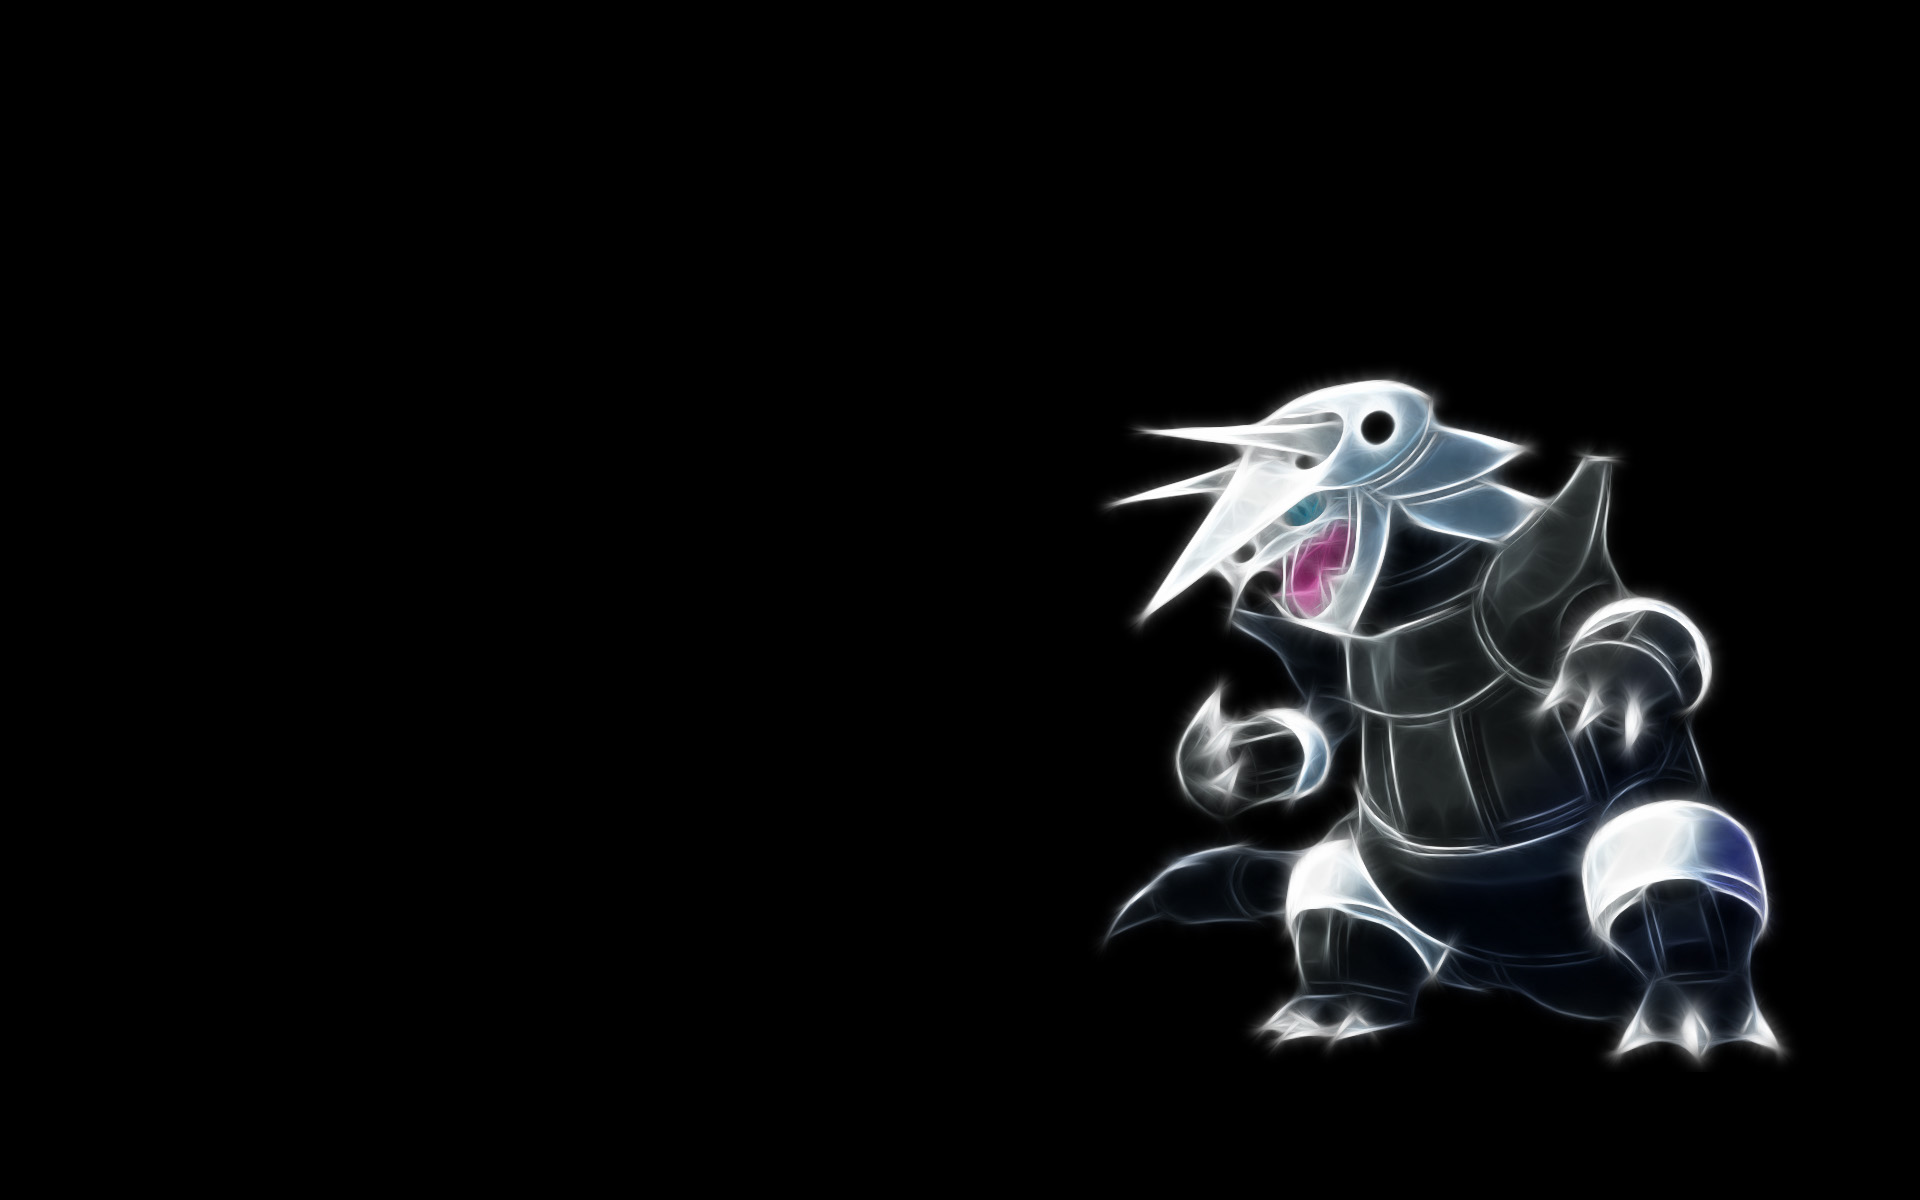 Aggron, the powerful steel Pokémon from Pokémon, depicted in anime style desktop wallpaper.